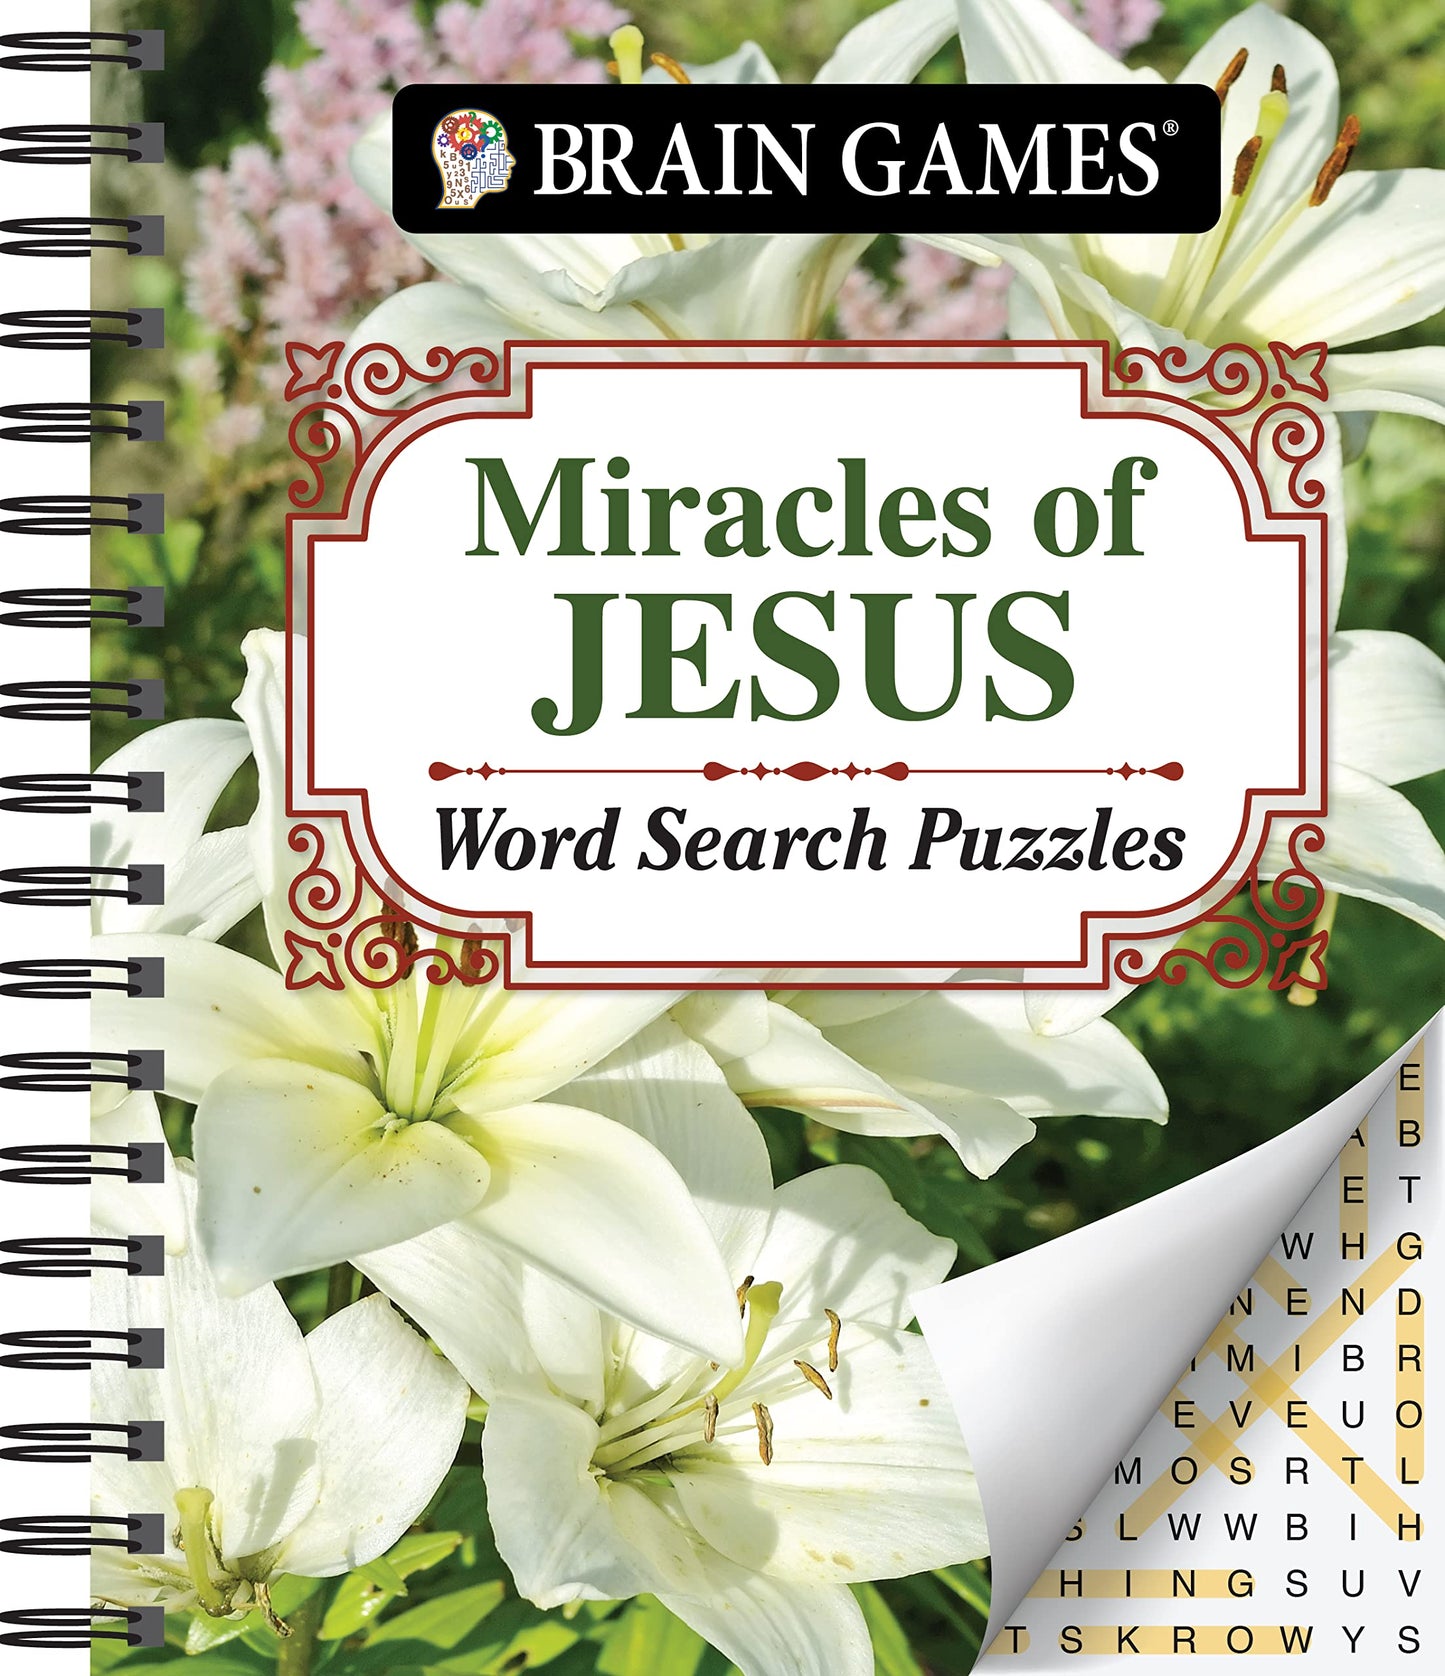 Brain Games - Miracles of Jesus Word Search Puzzles (Brain Games - Bible)